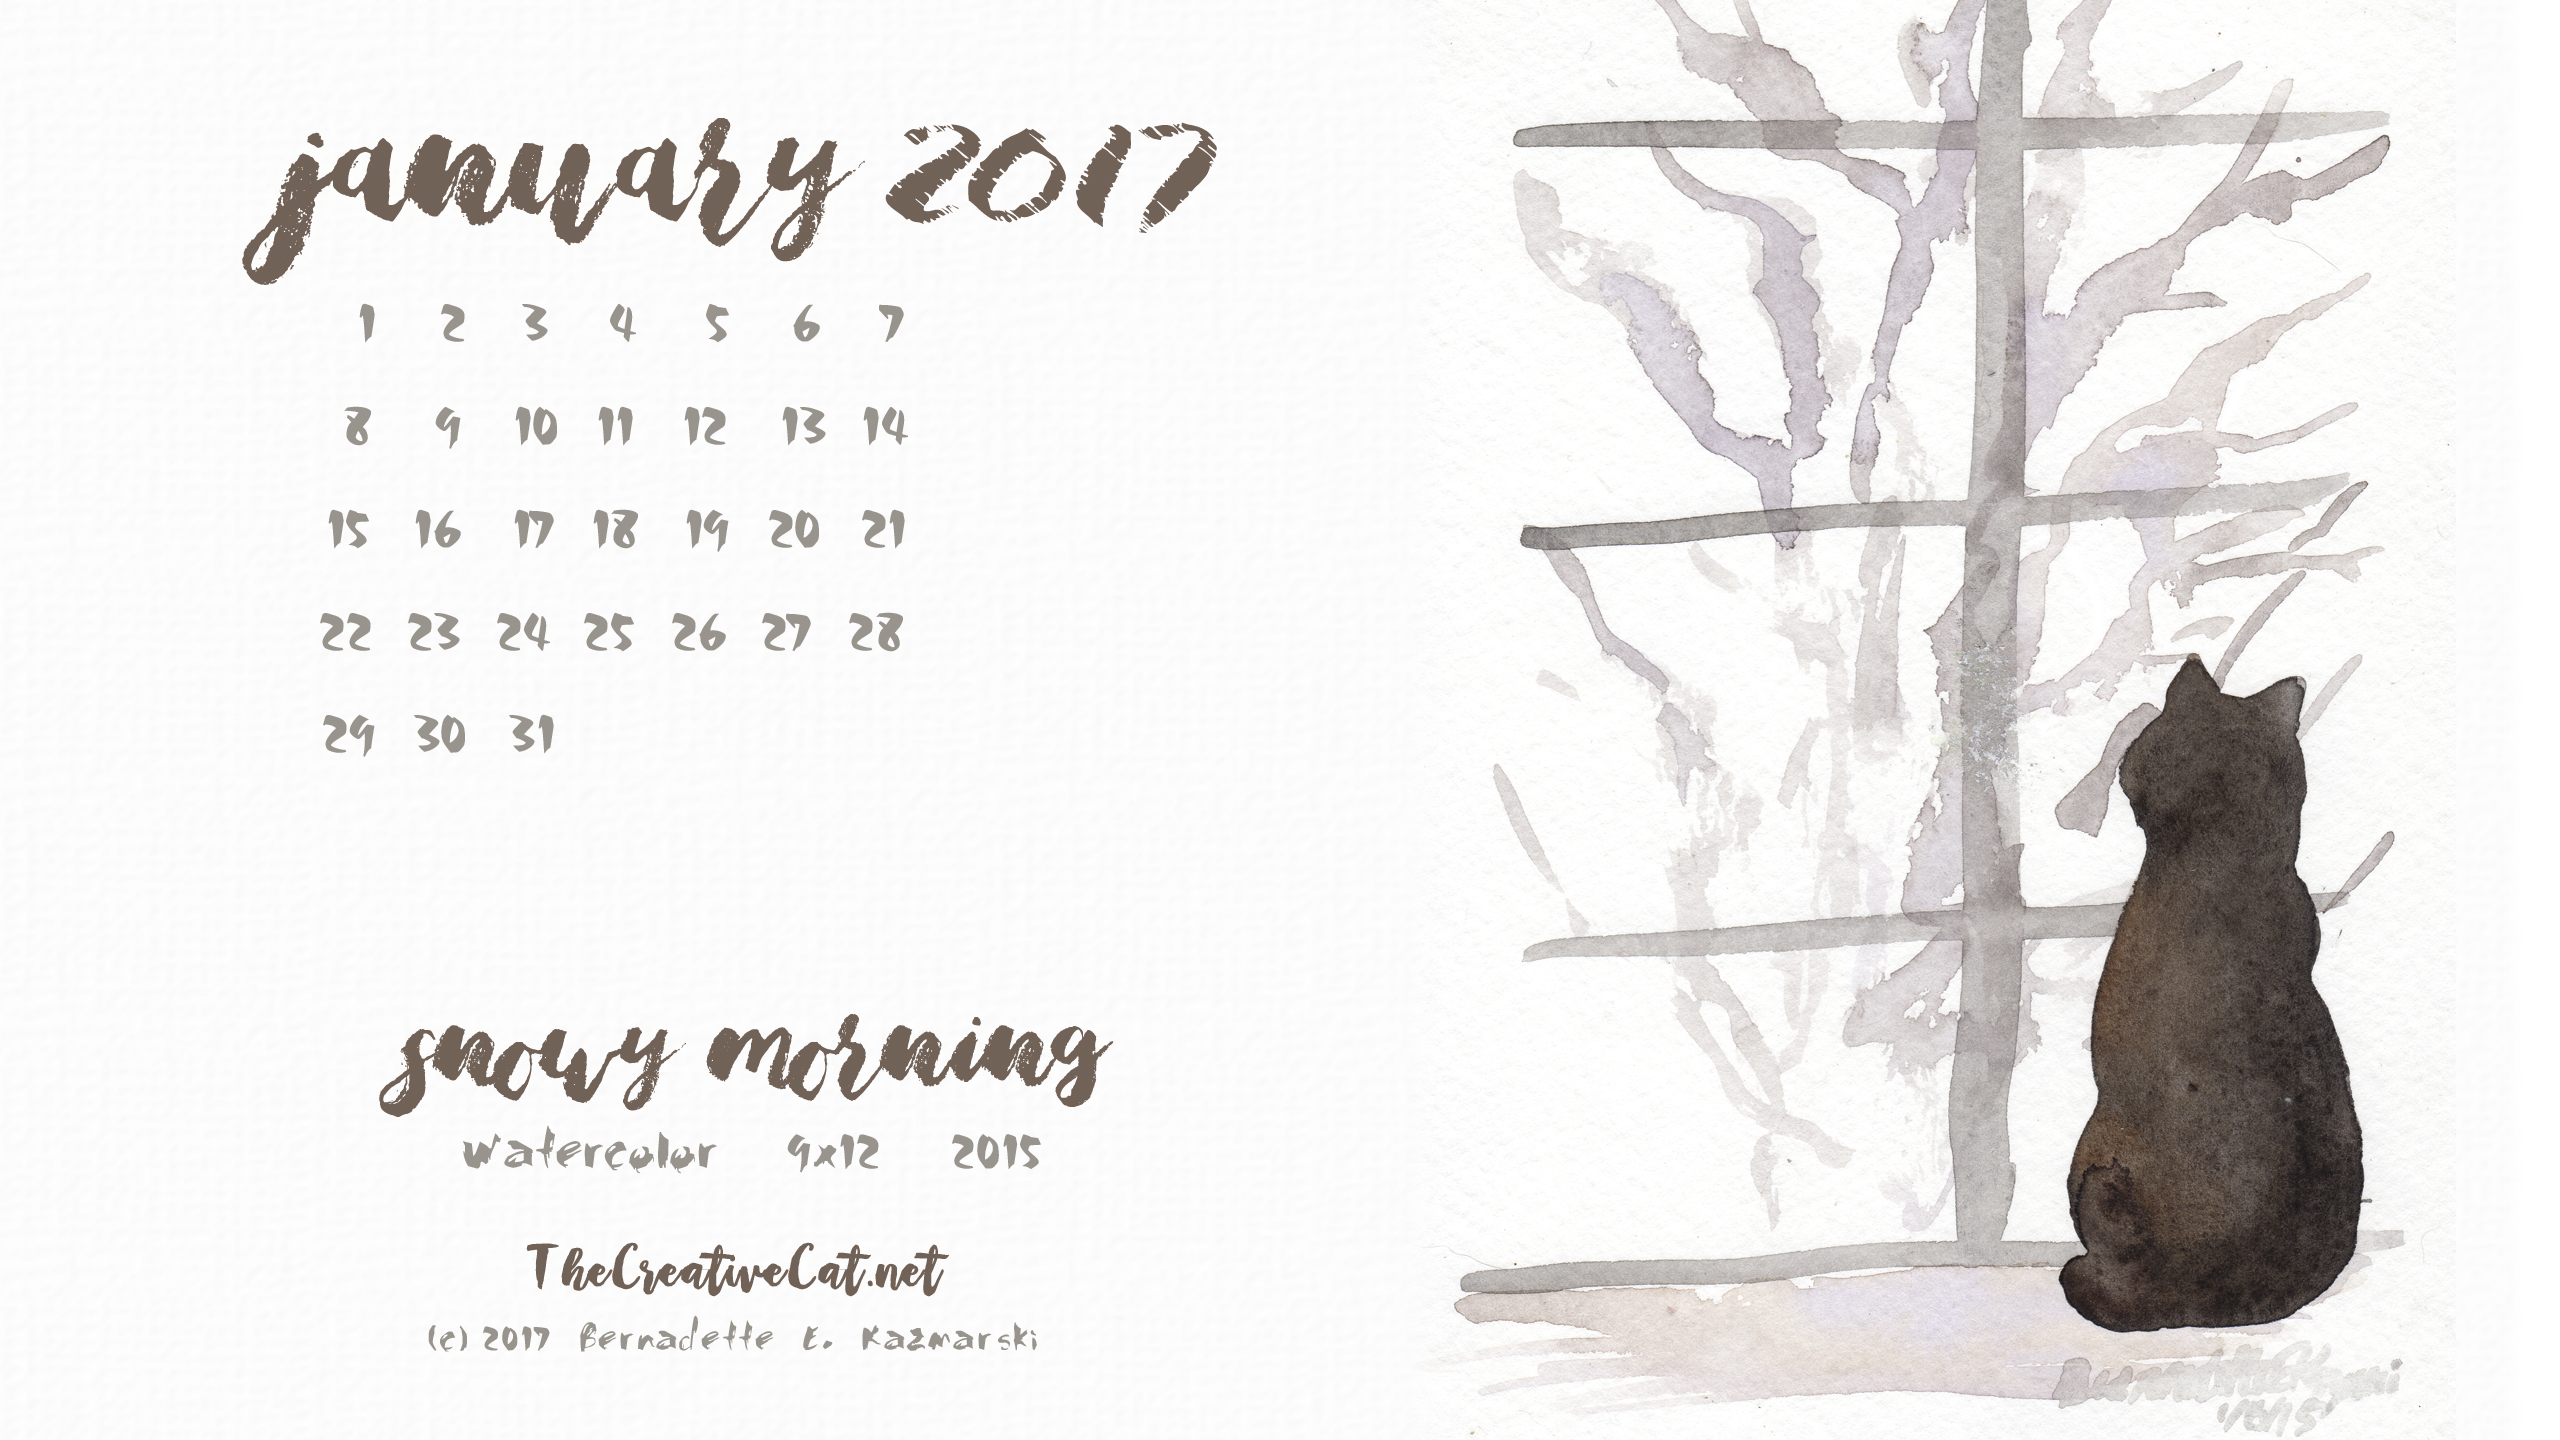 "Snowy Morning" desktop calendar 2560 x 1440 for HD and wide screens.